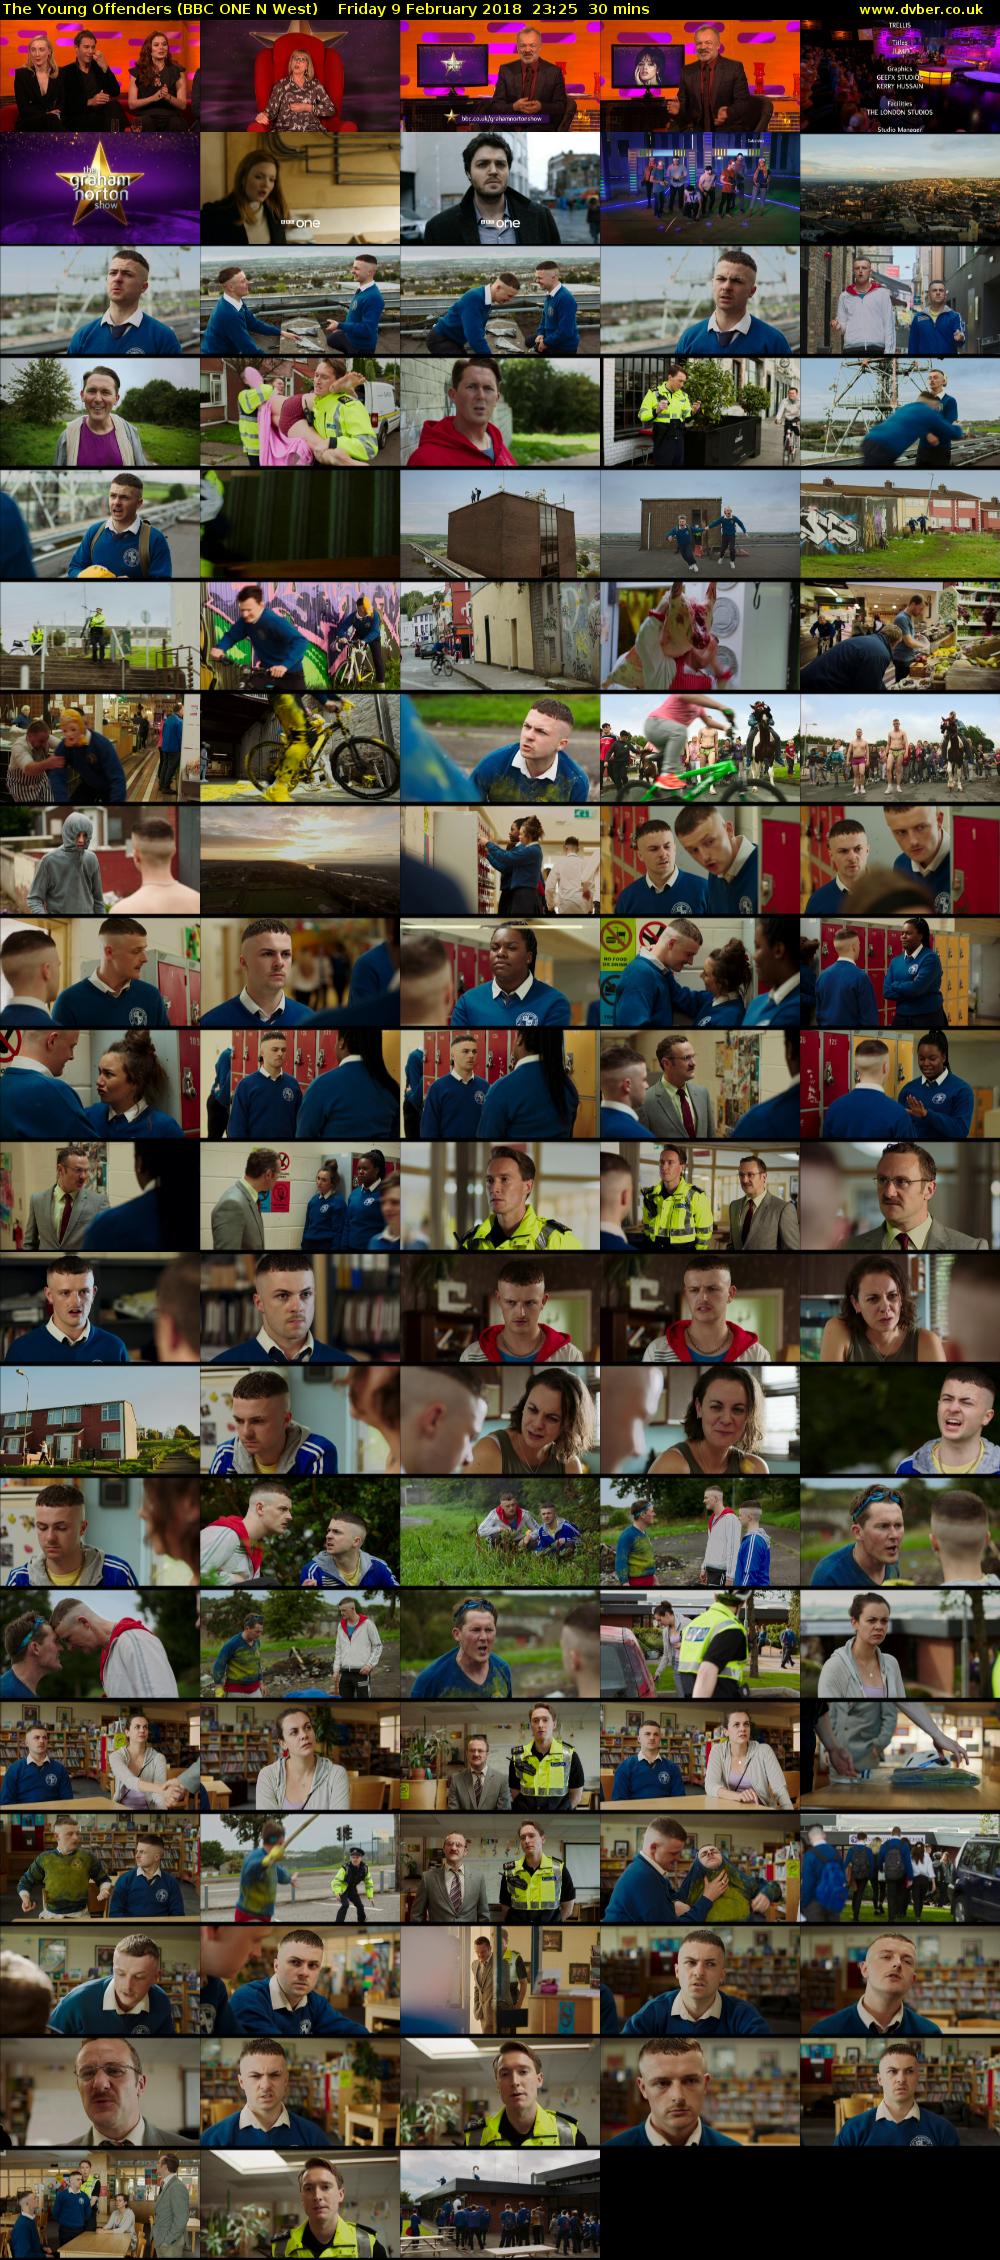 The Young Offenders (BBC ONE N West) Friday 9 February 2018 23:25 - 23:55